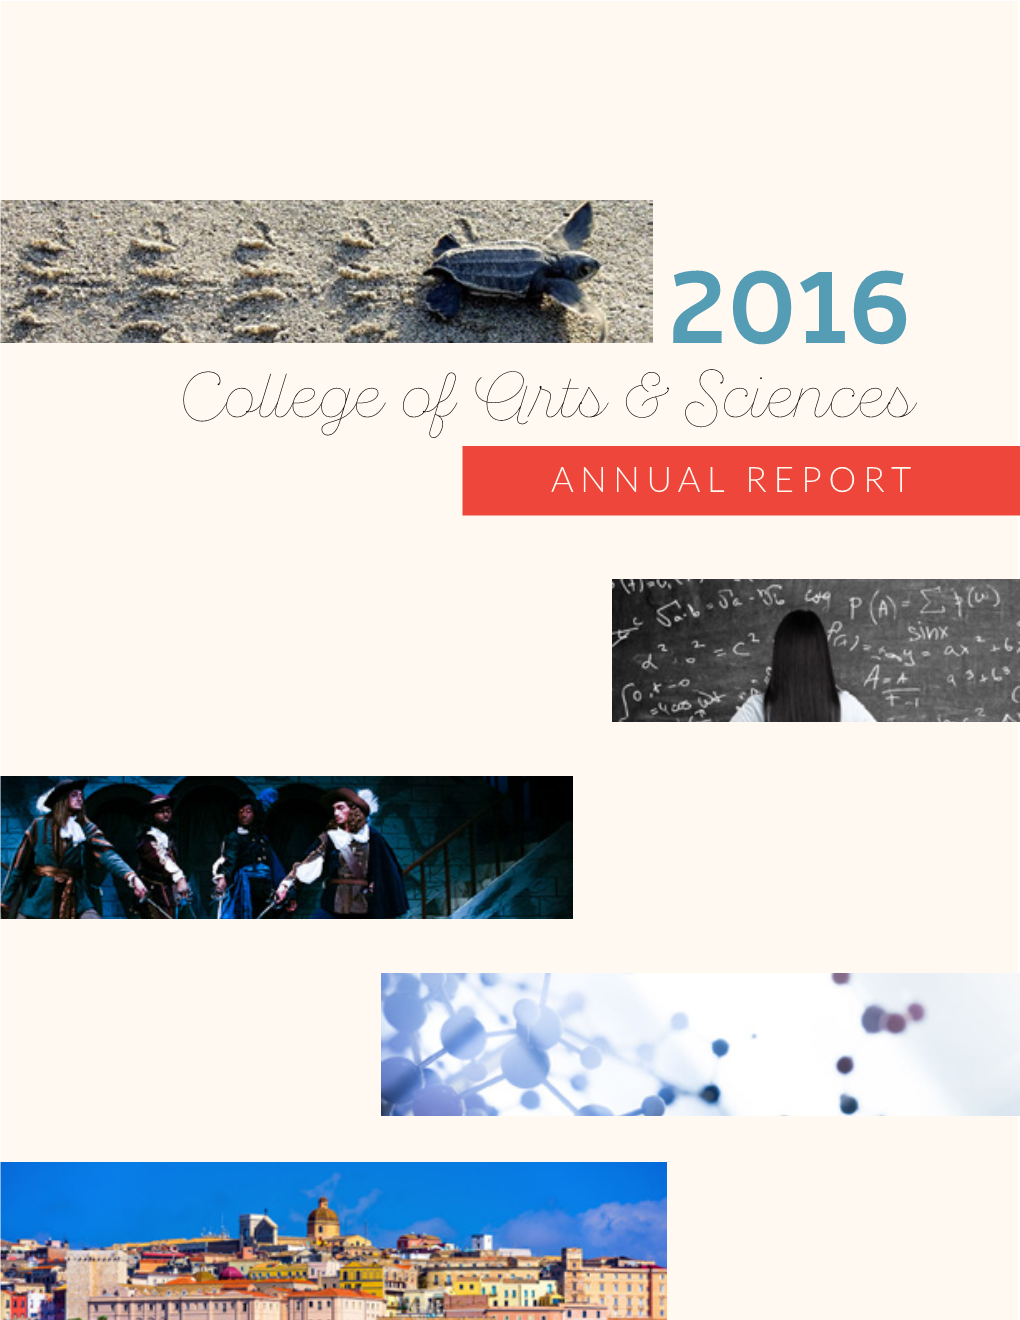 College of Arts and Sciences Annual Report 2016